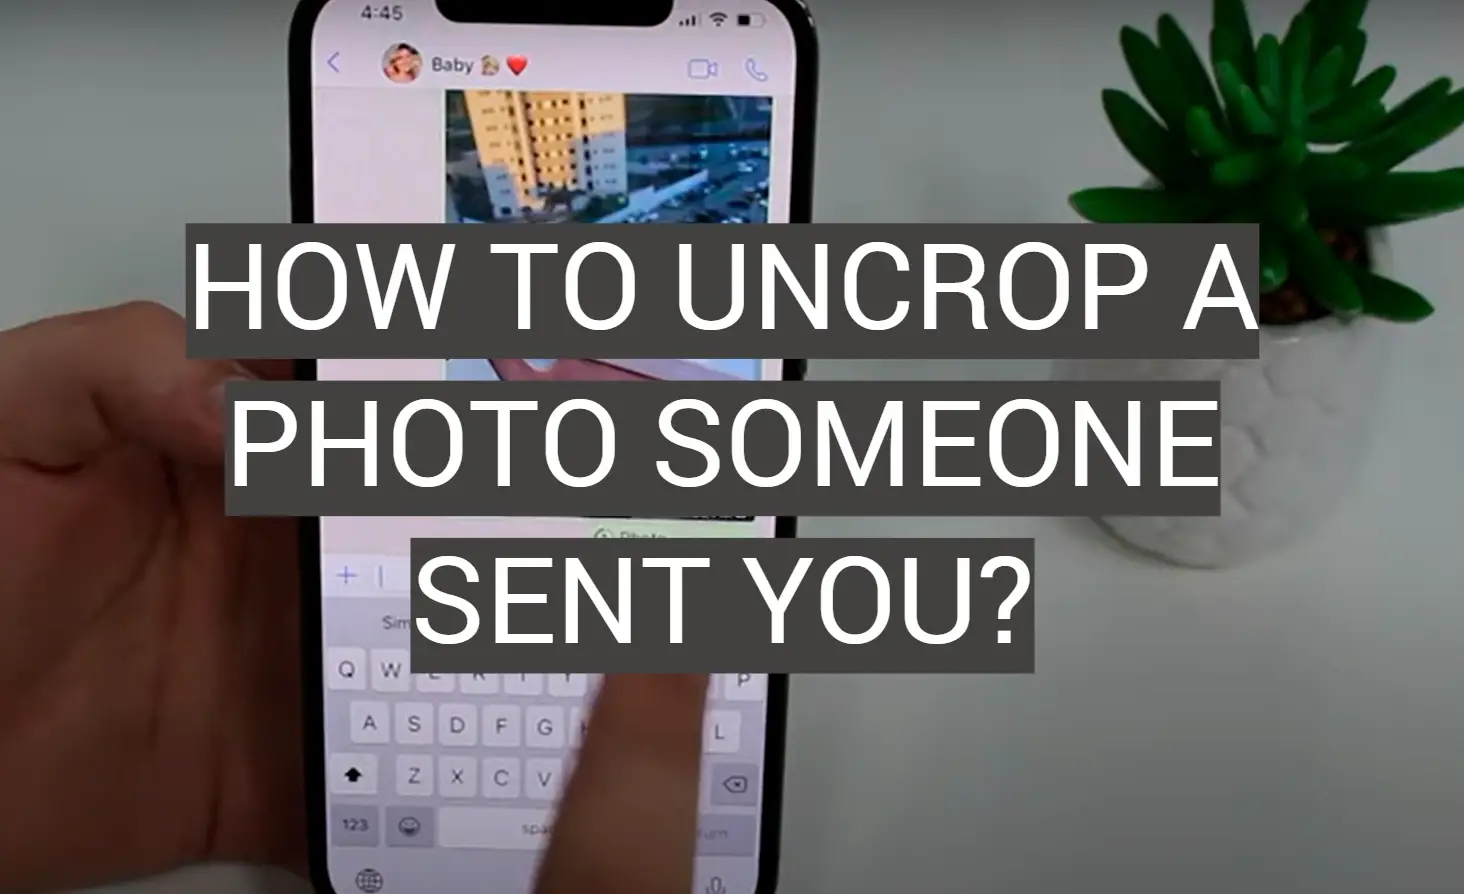 How to Uncrop a Photo Someone Sent You?